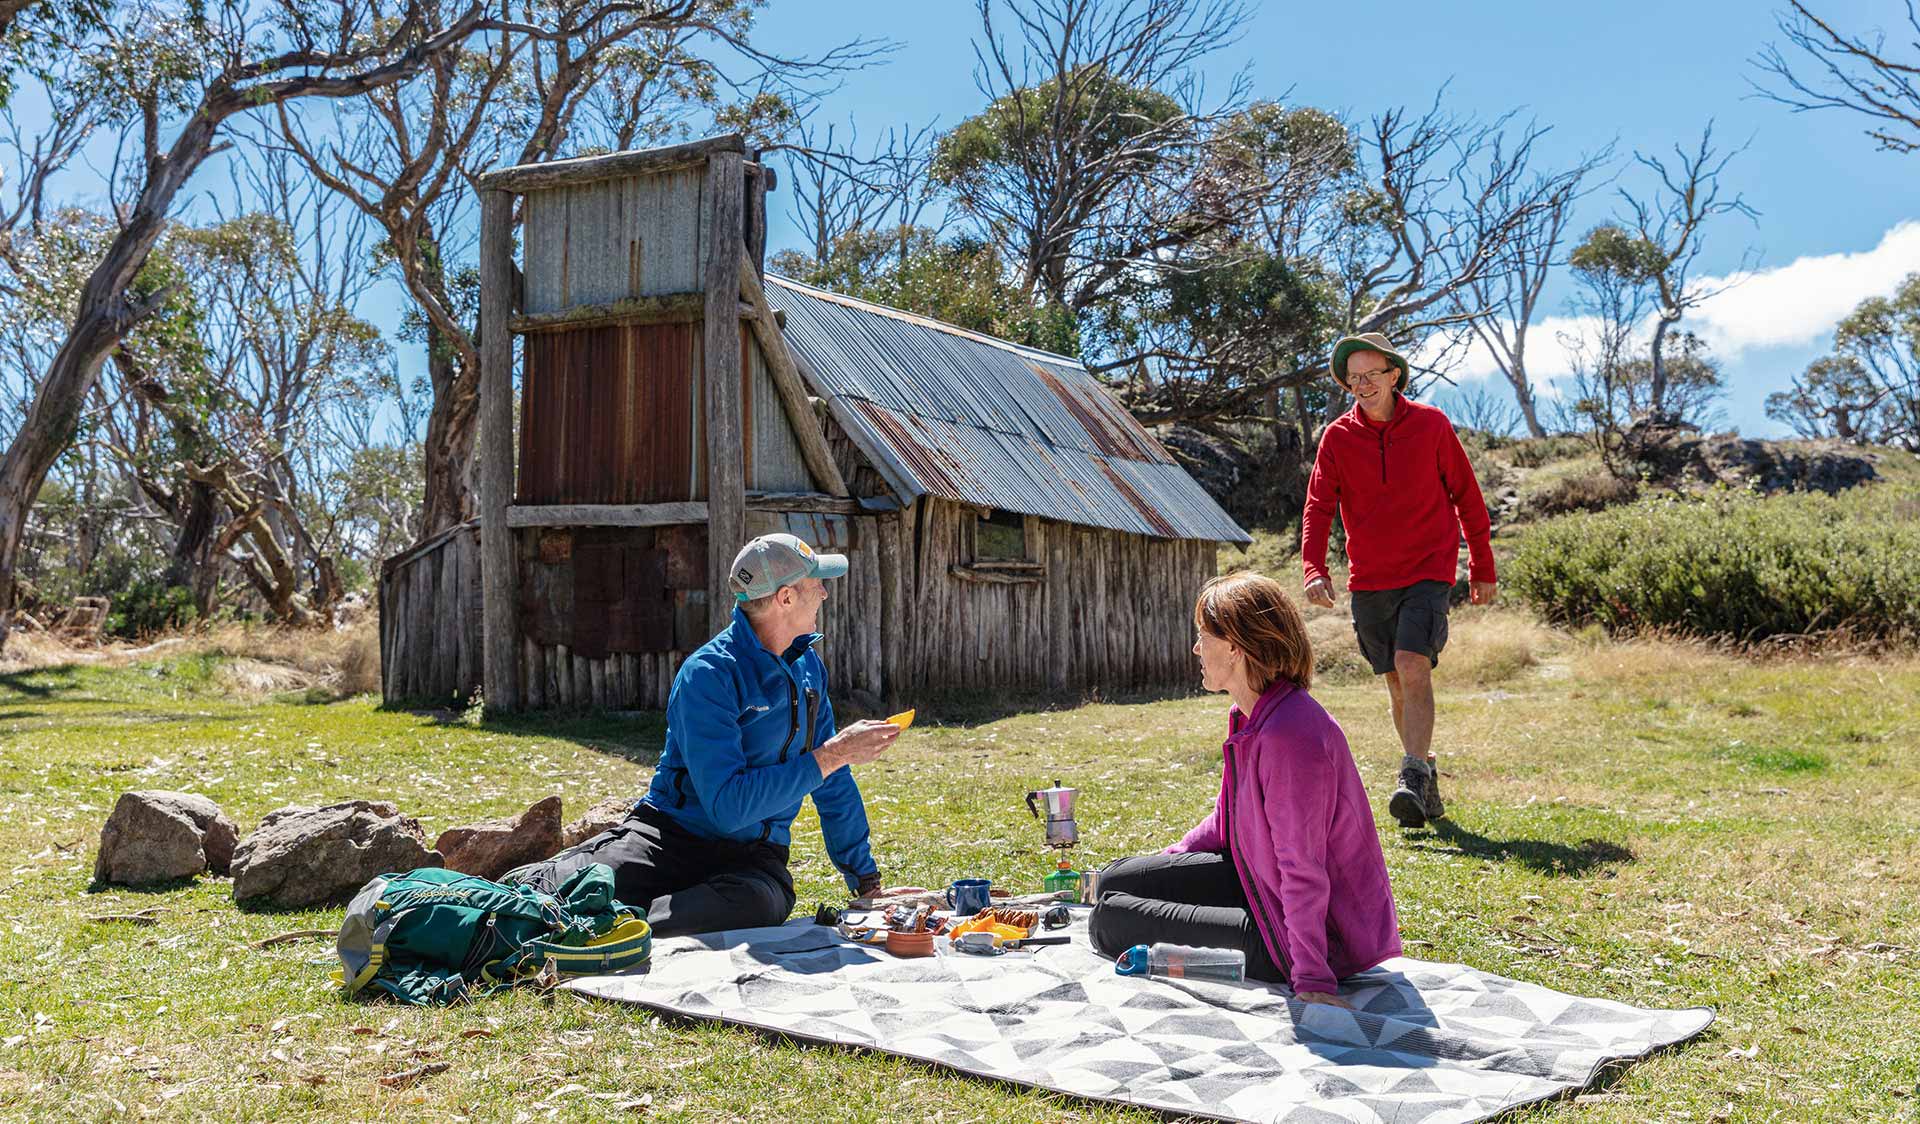 Three friends enjoy a picnic on the grass in front of the historic Wallace Hut.